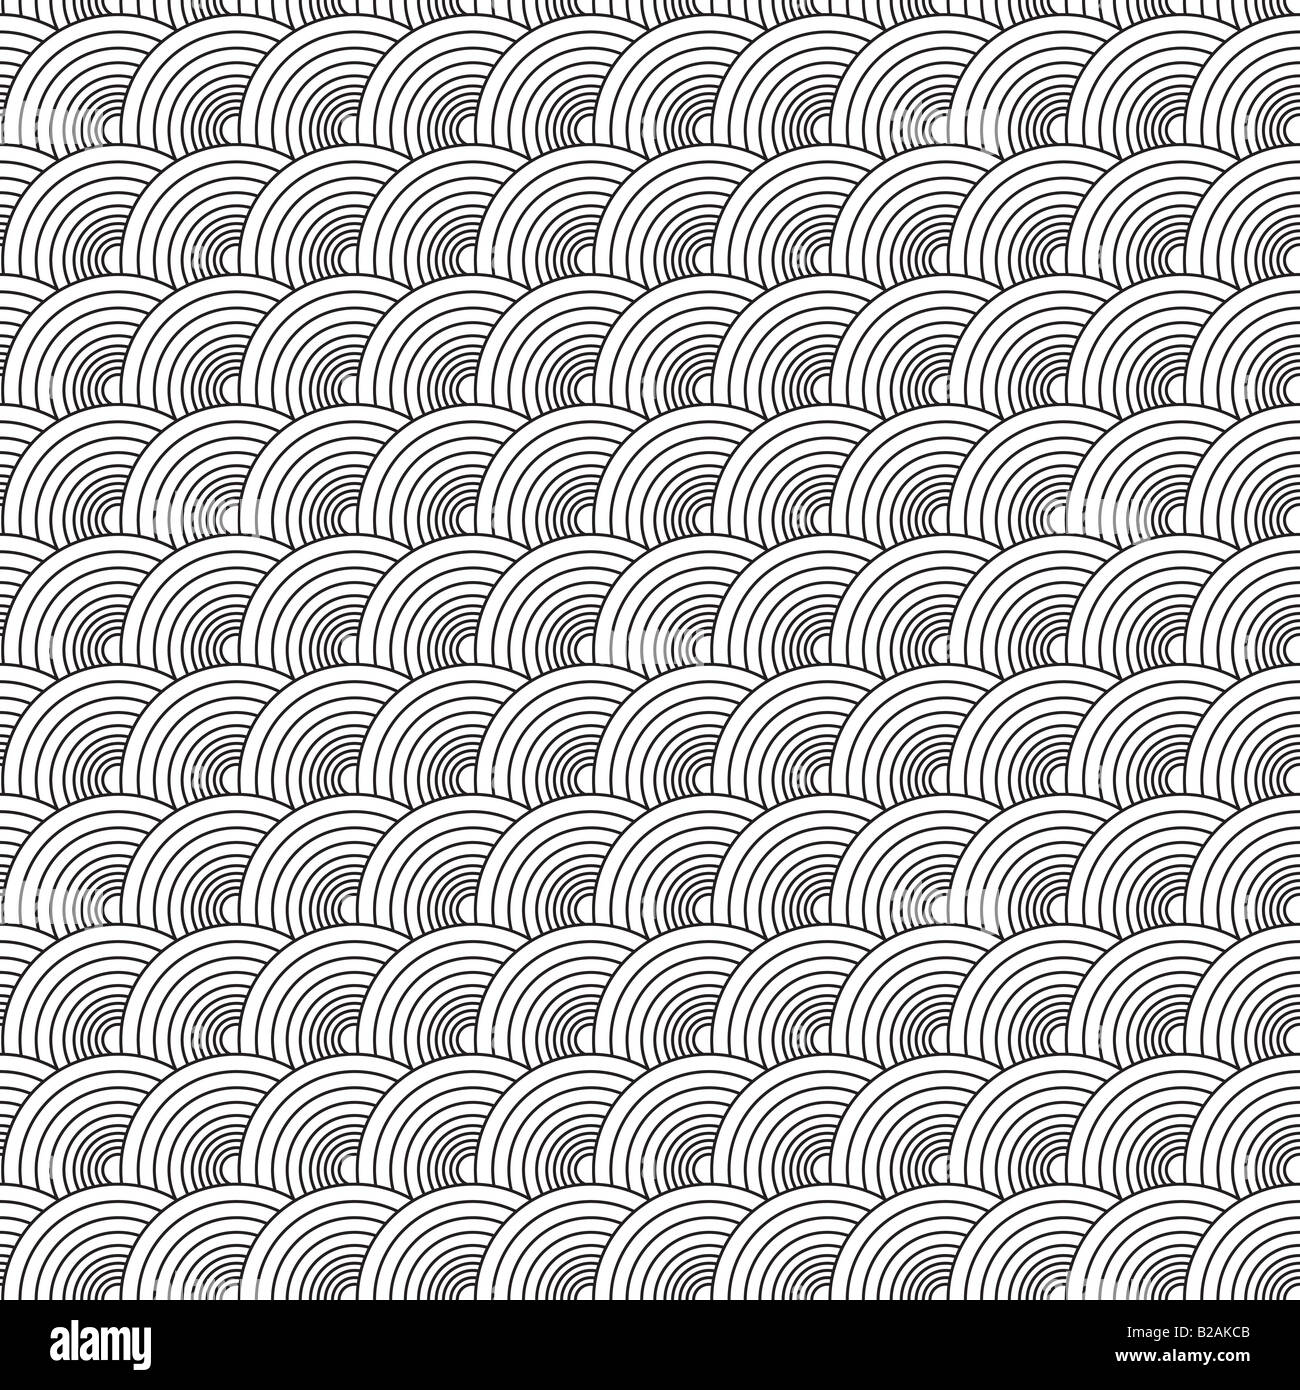 Seventies illustrated circular abstract design that seamlessly repeats Stock Photo